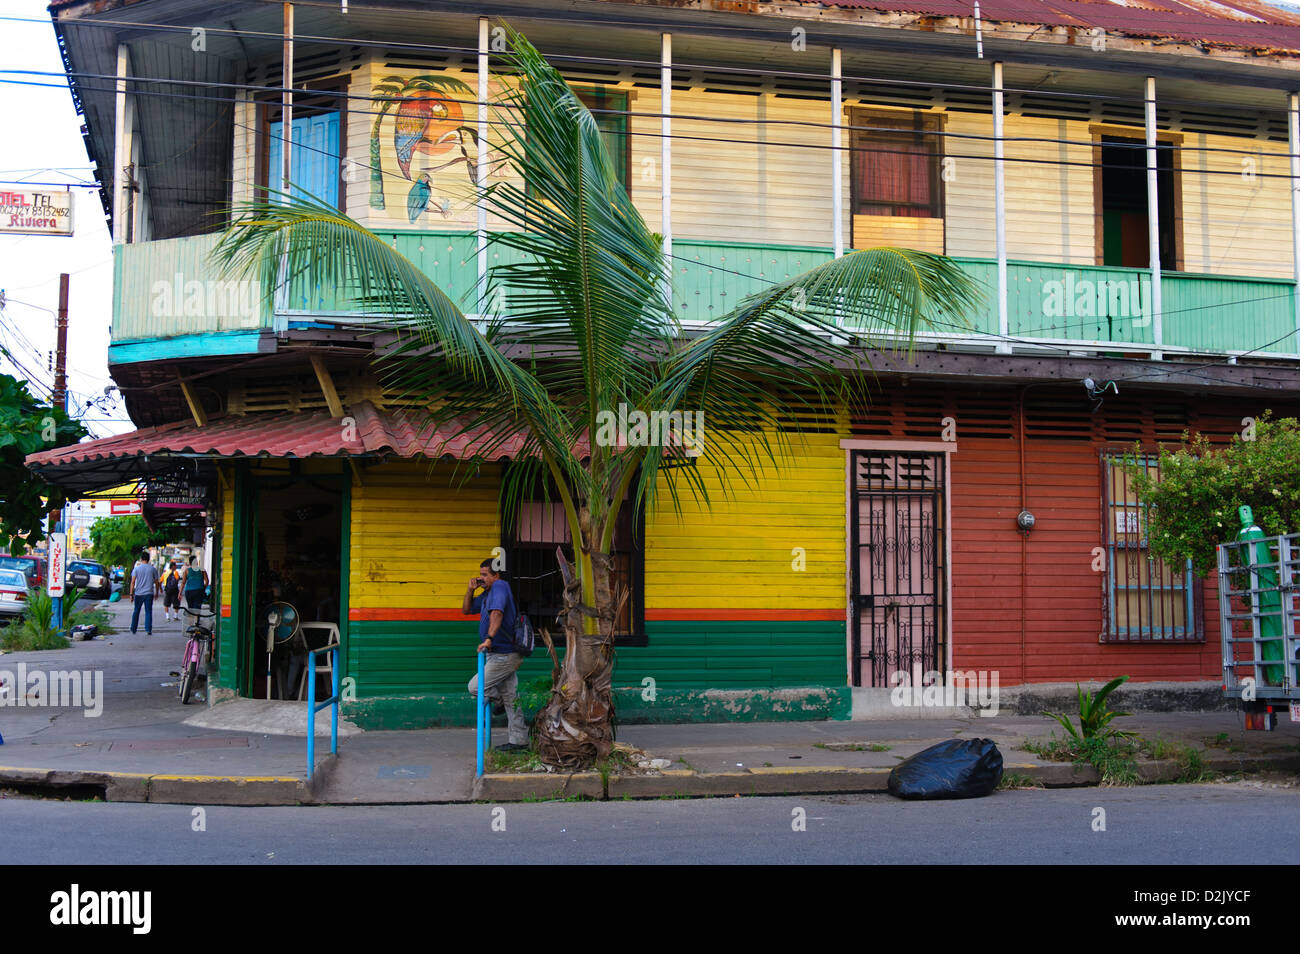 Old colourful wooden building / hotel in the center of  port city of Puntarenas,Costa Rica. Stock Photo